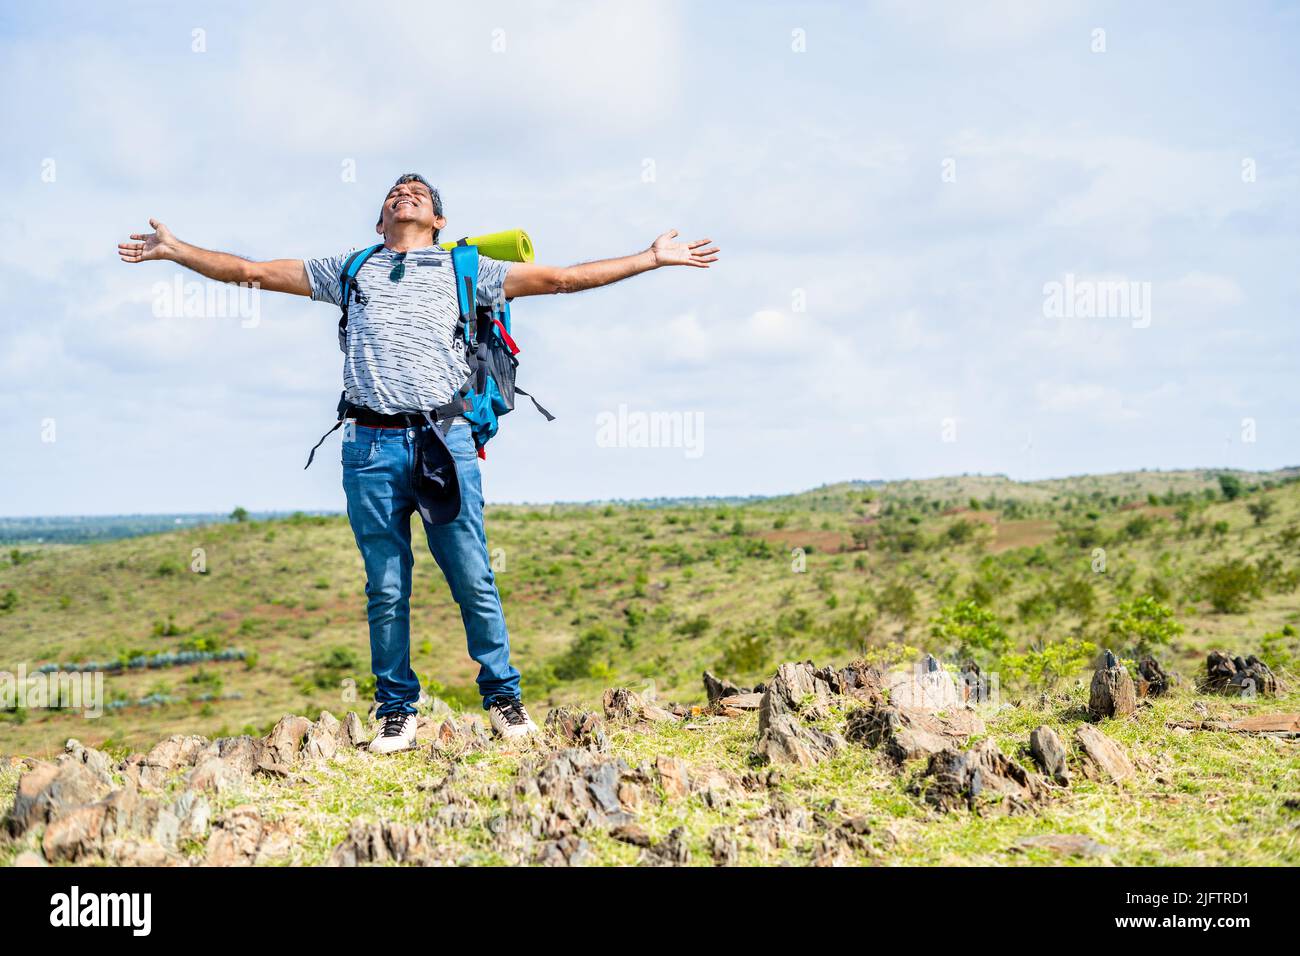 Middle aged man feeling or admiring natures fresh air by stretching arms during hiking at hill top - concept of refreshment, active healthy lifestyle Stock Photo